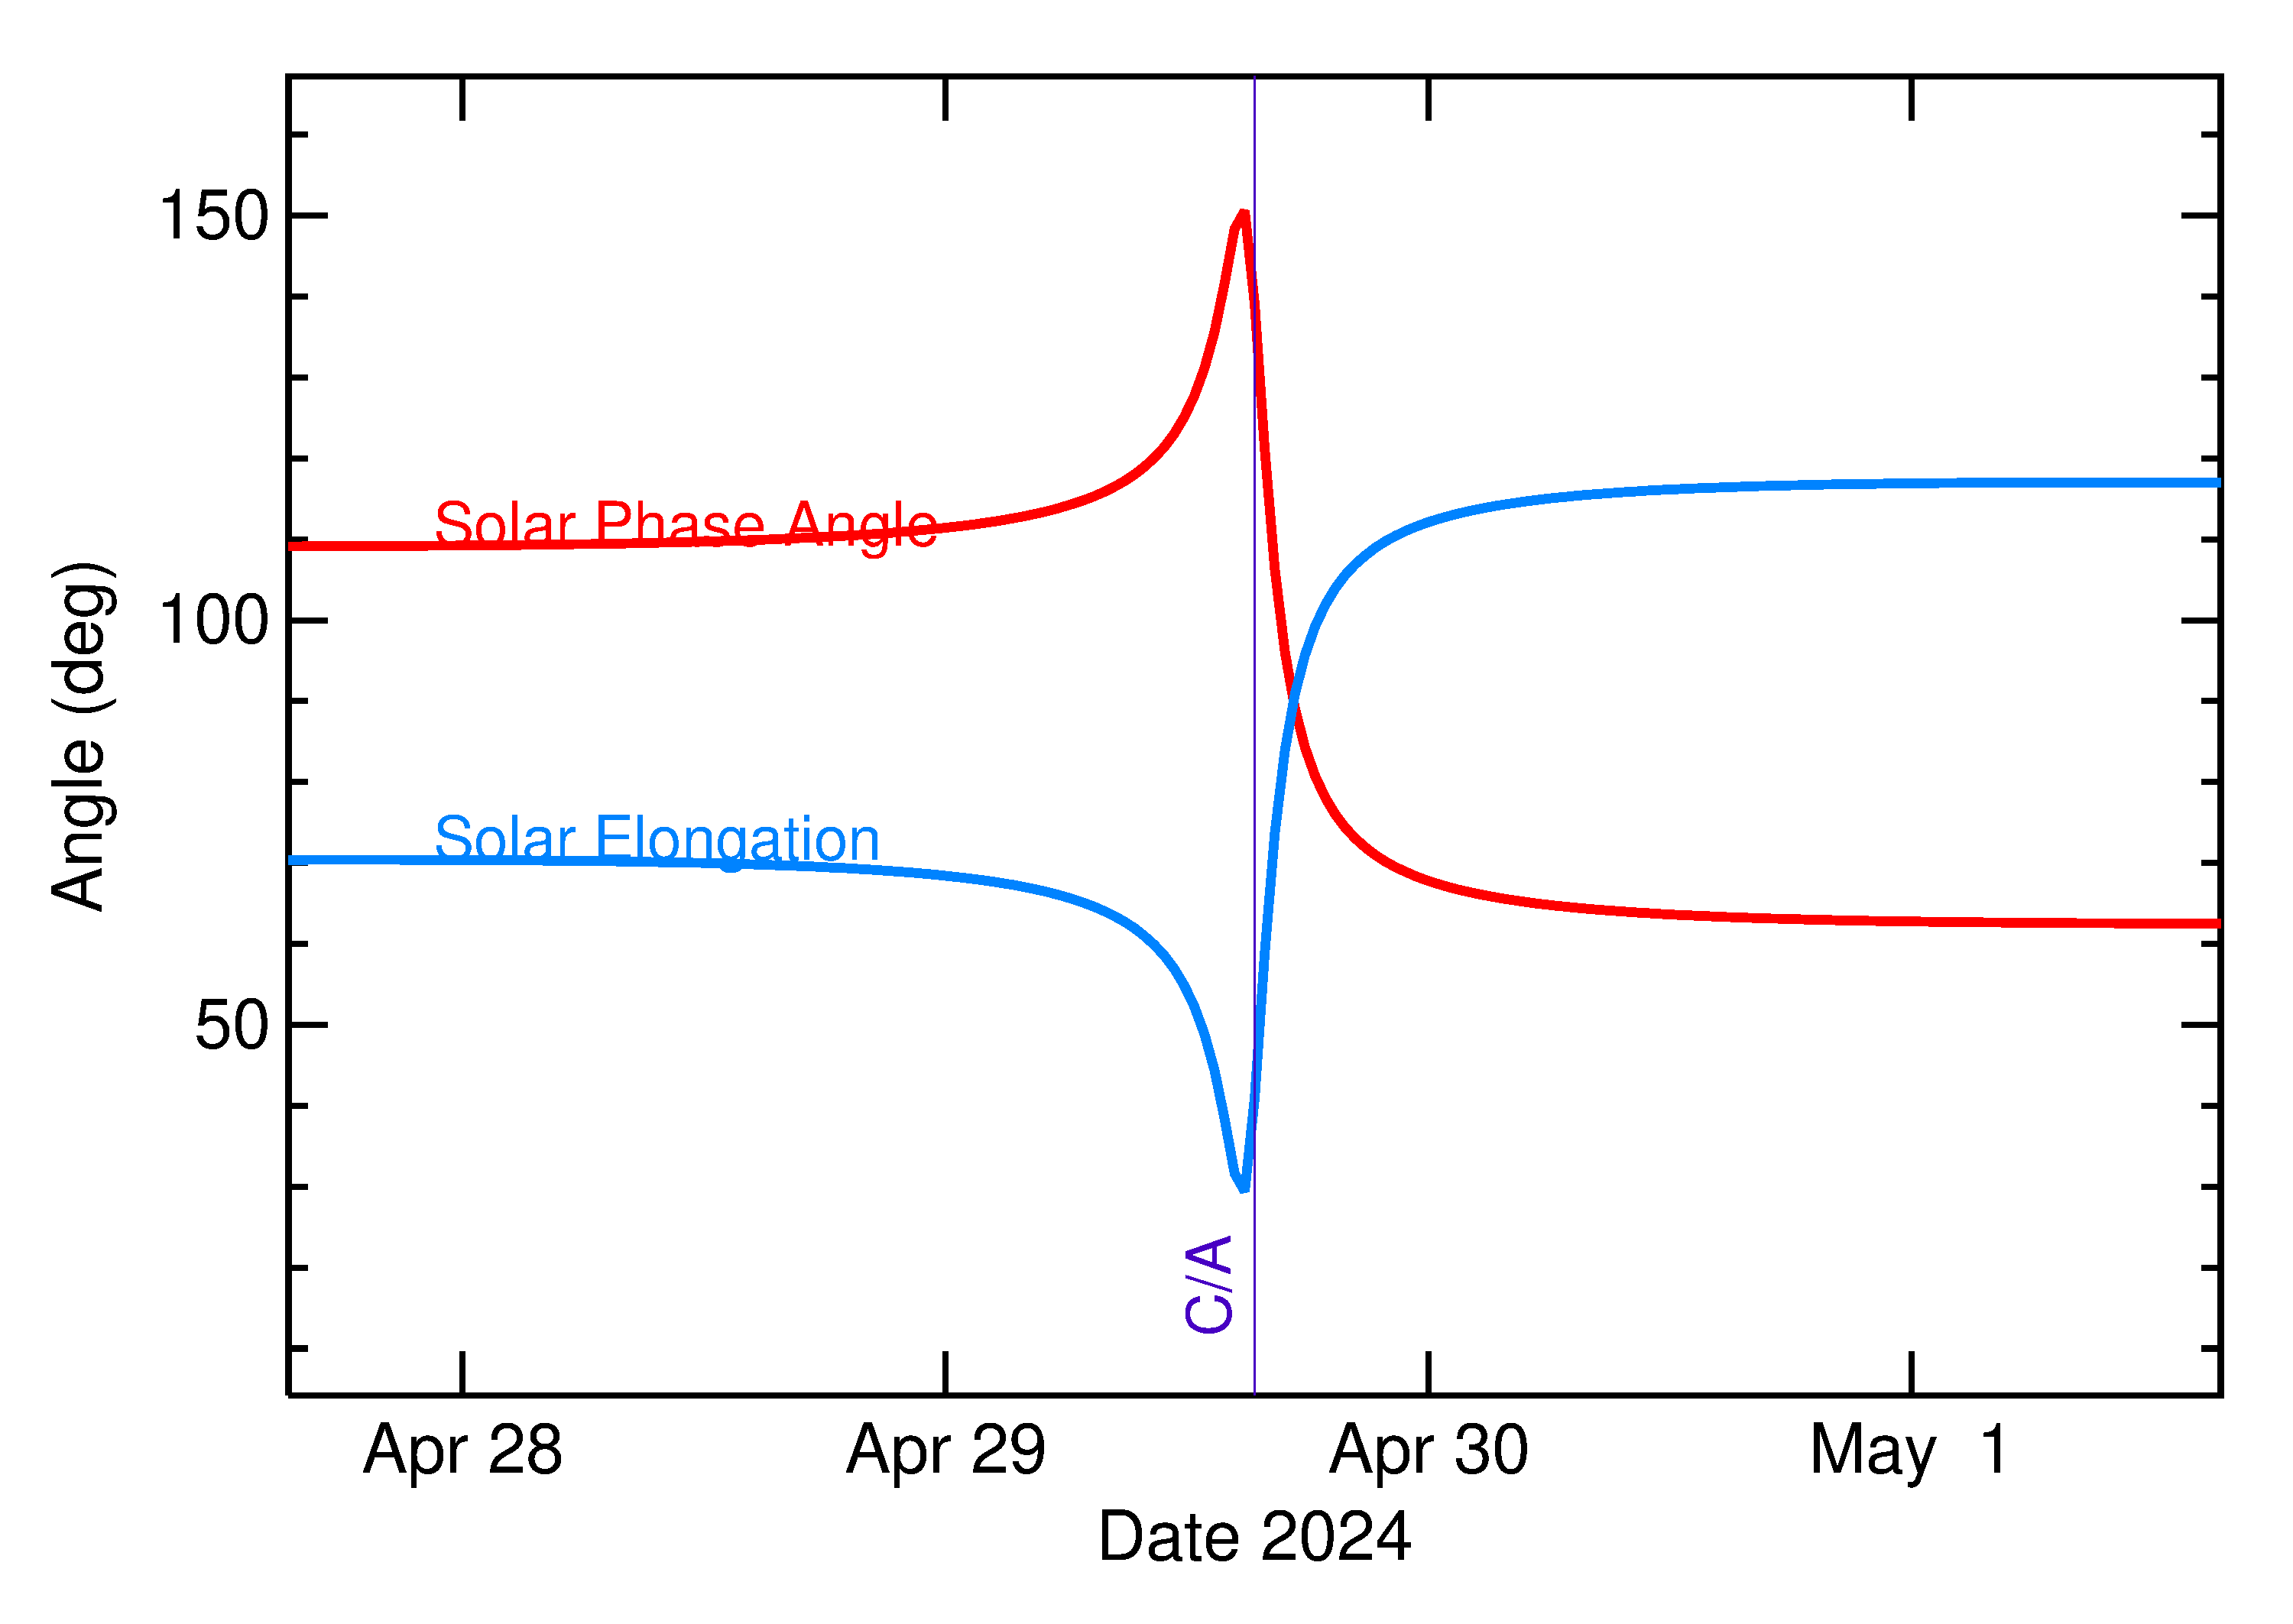 Solar Elongation and Solar Phase Angle of 2024 HO2 in the days around closest approach